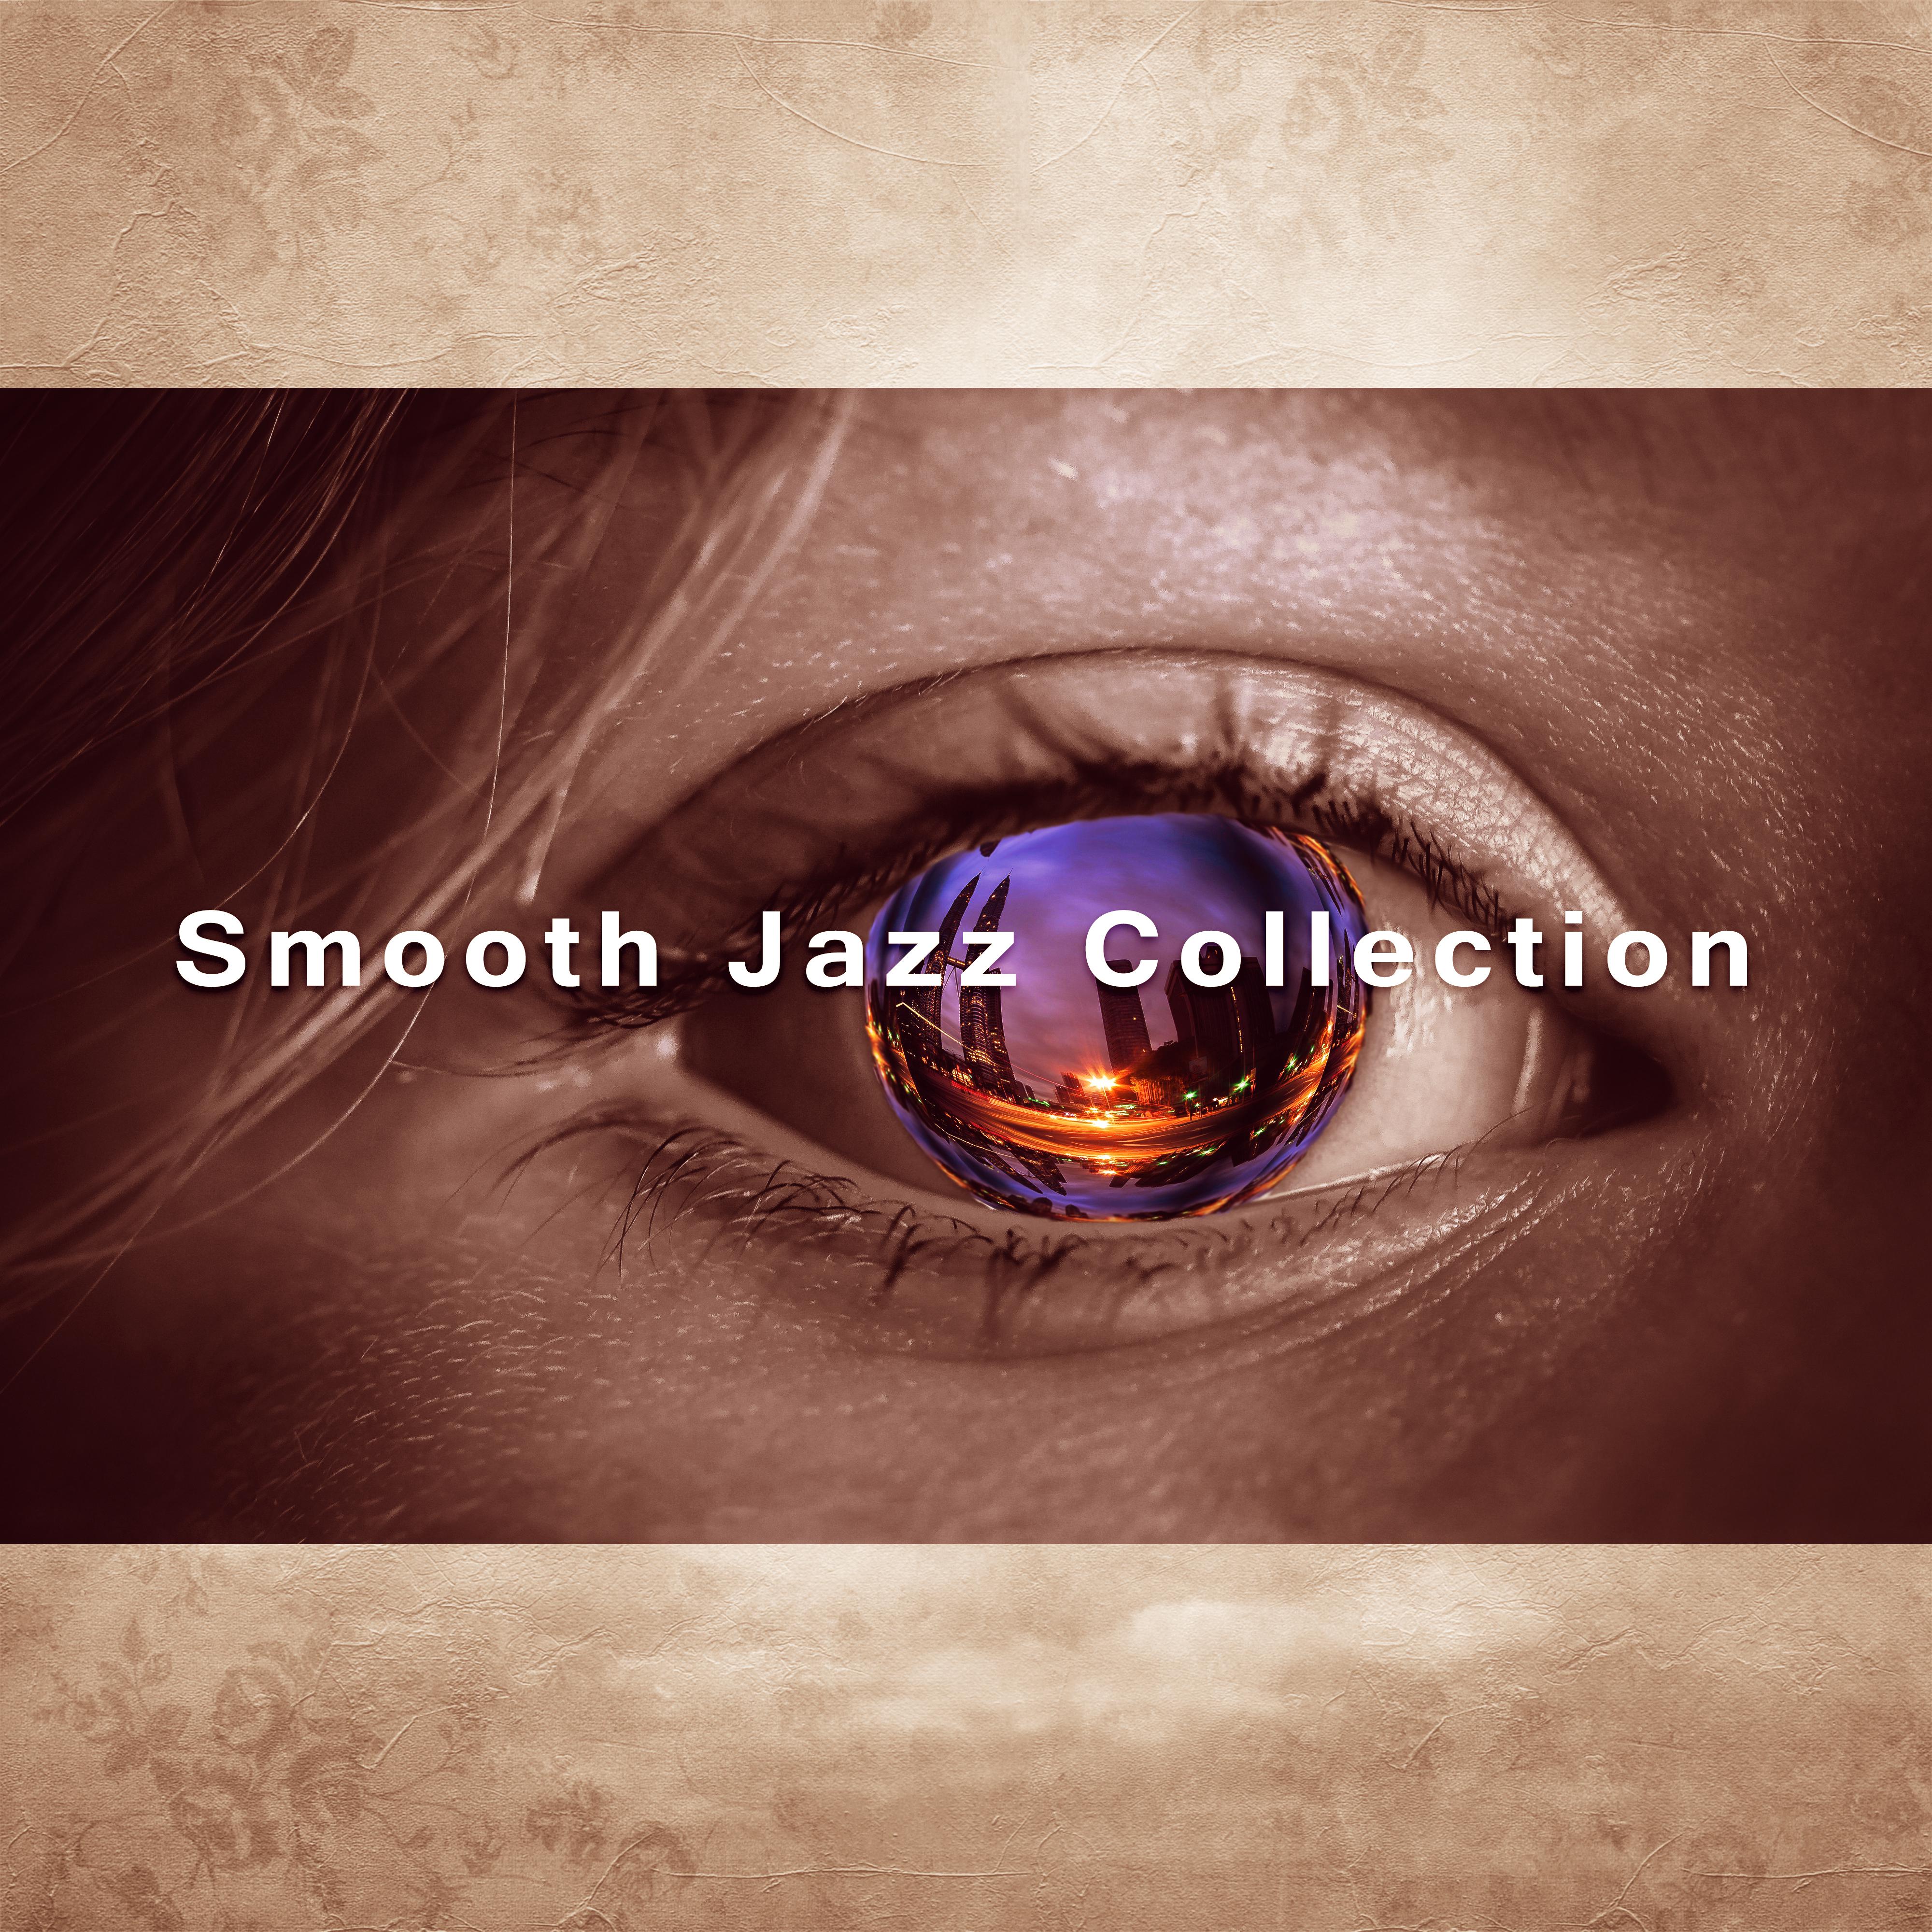 Smooth Jazz Collection– Calming Jazz, Instrumental, Ambient Music, Jazz Night Piano